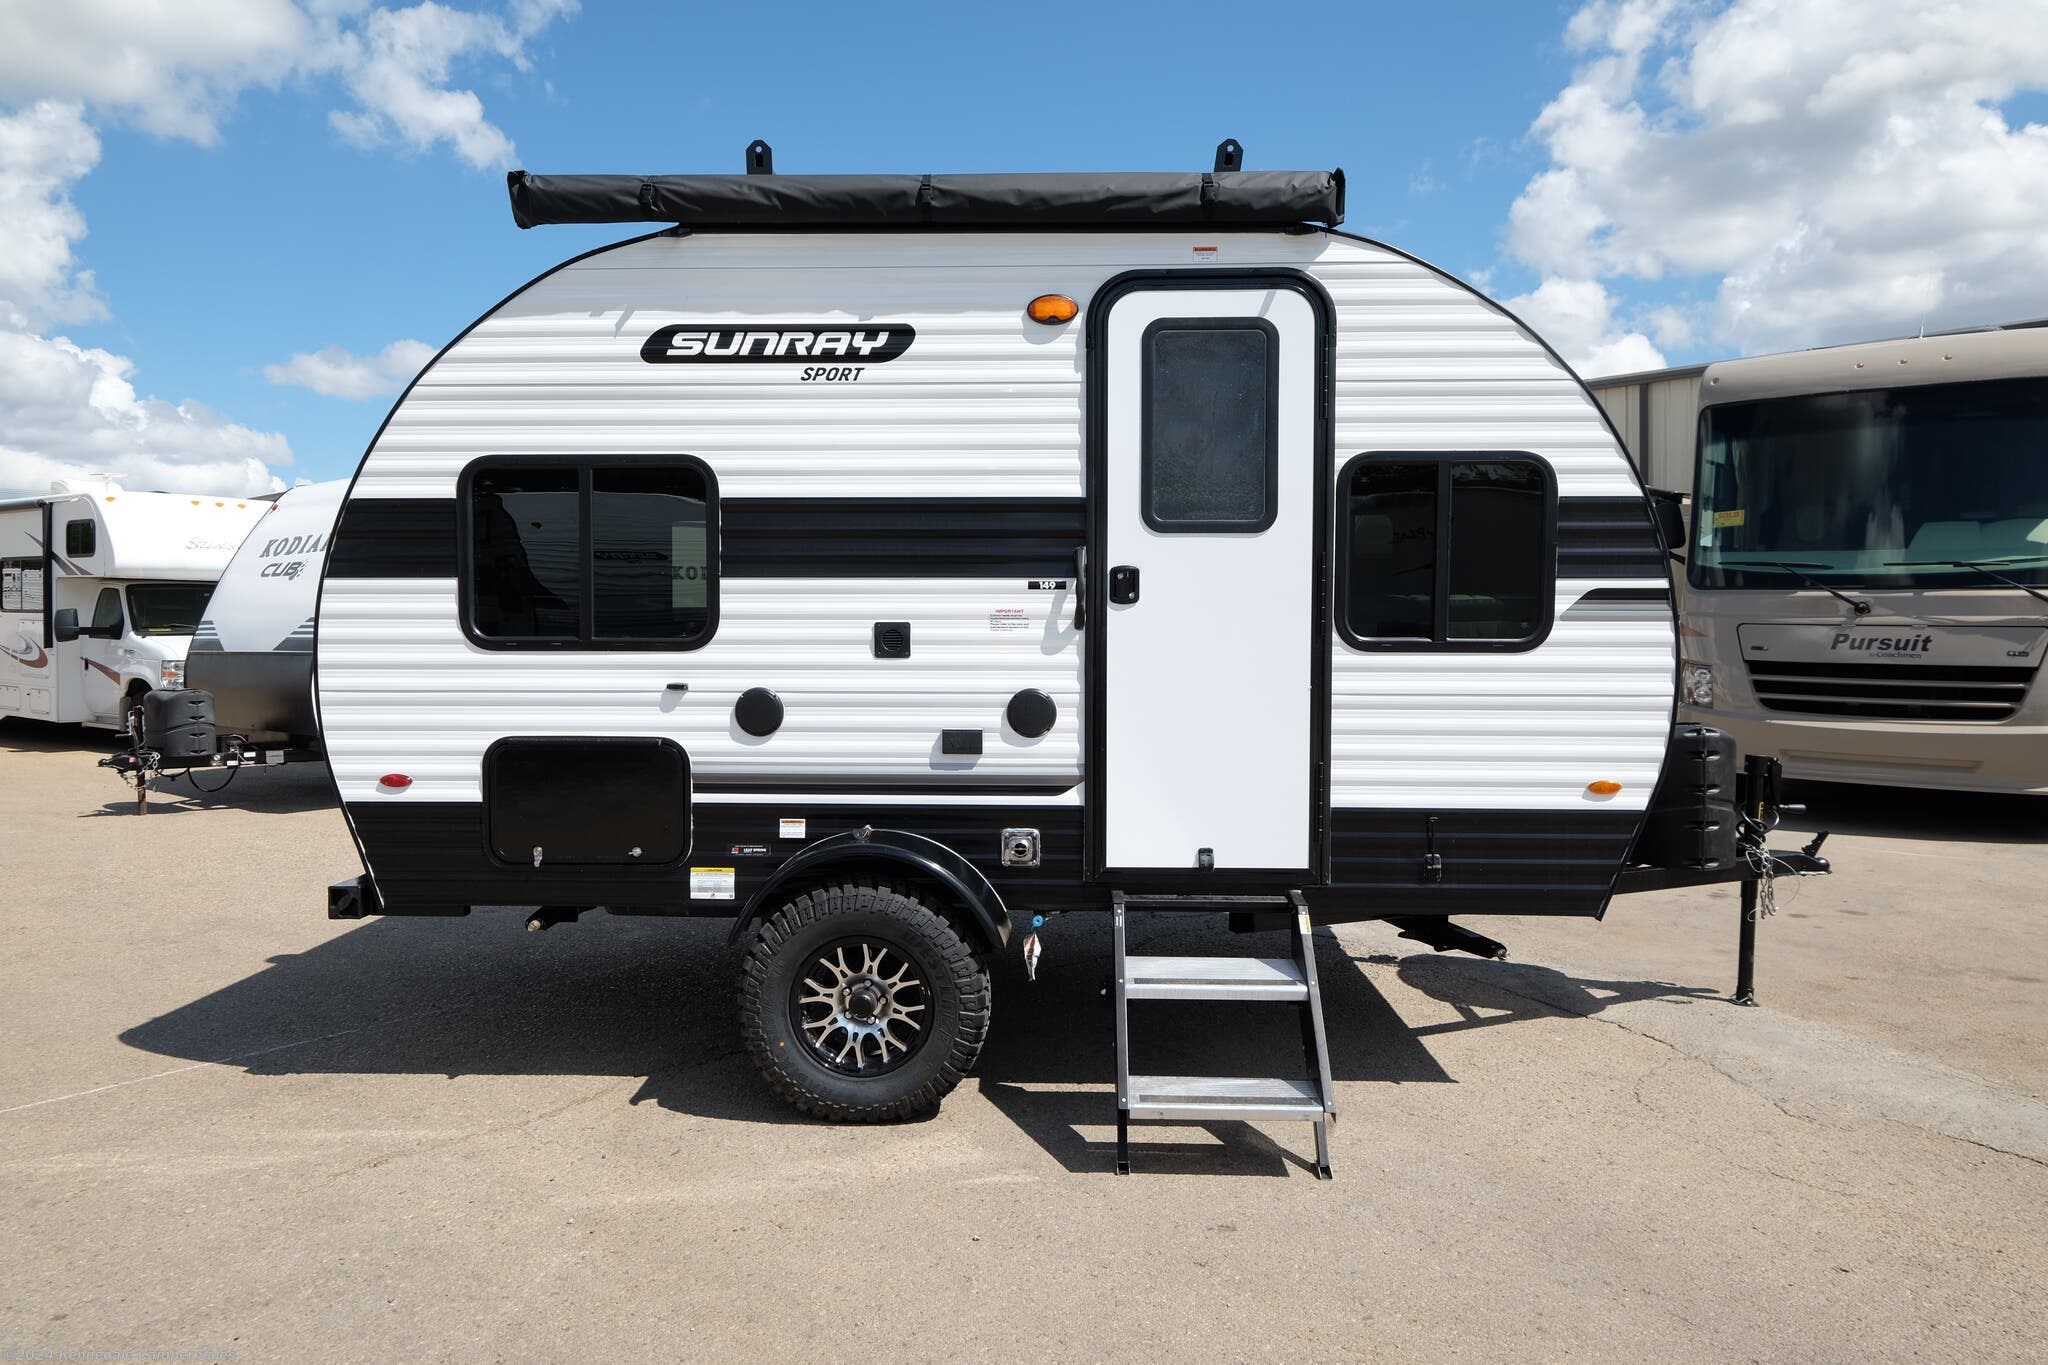 2023 Sunset Park RV SunRay 149 RV for Sale in Kennedale, TX 76060